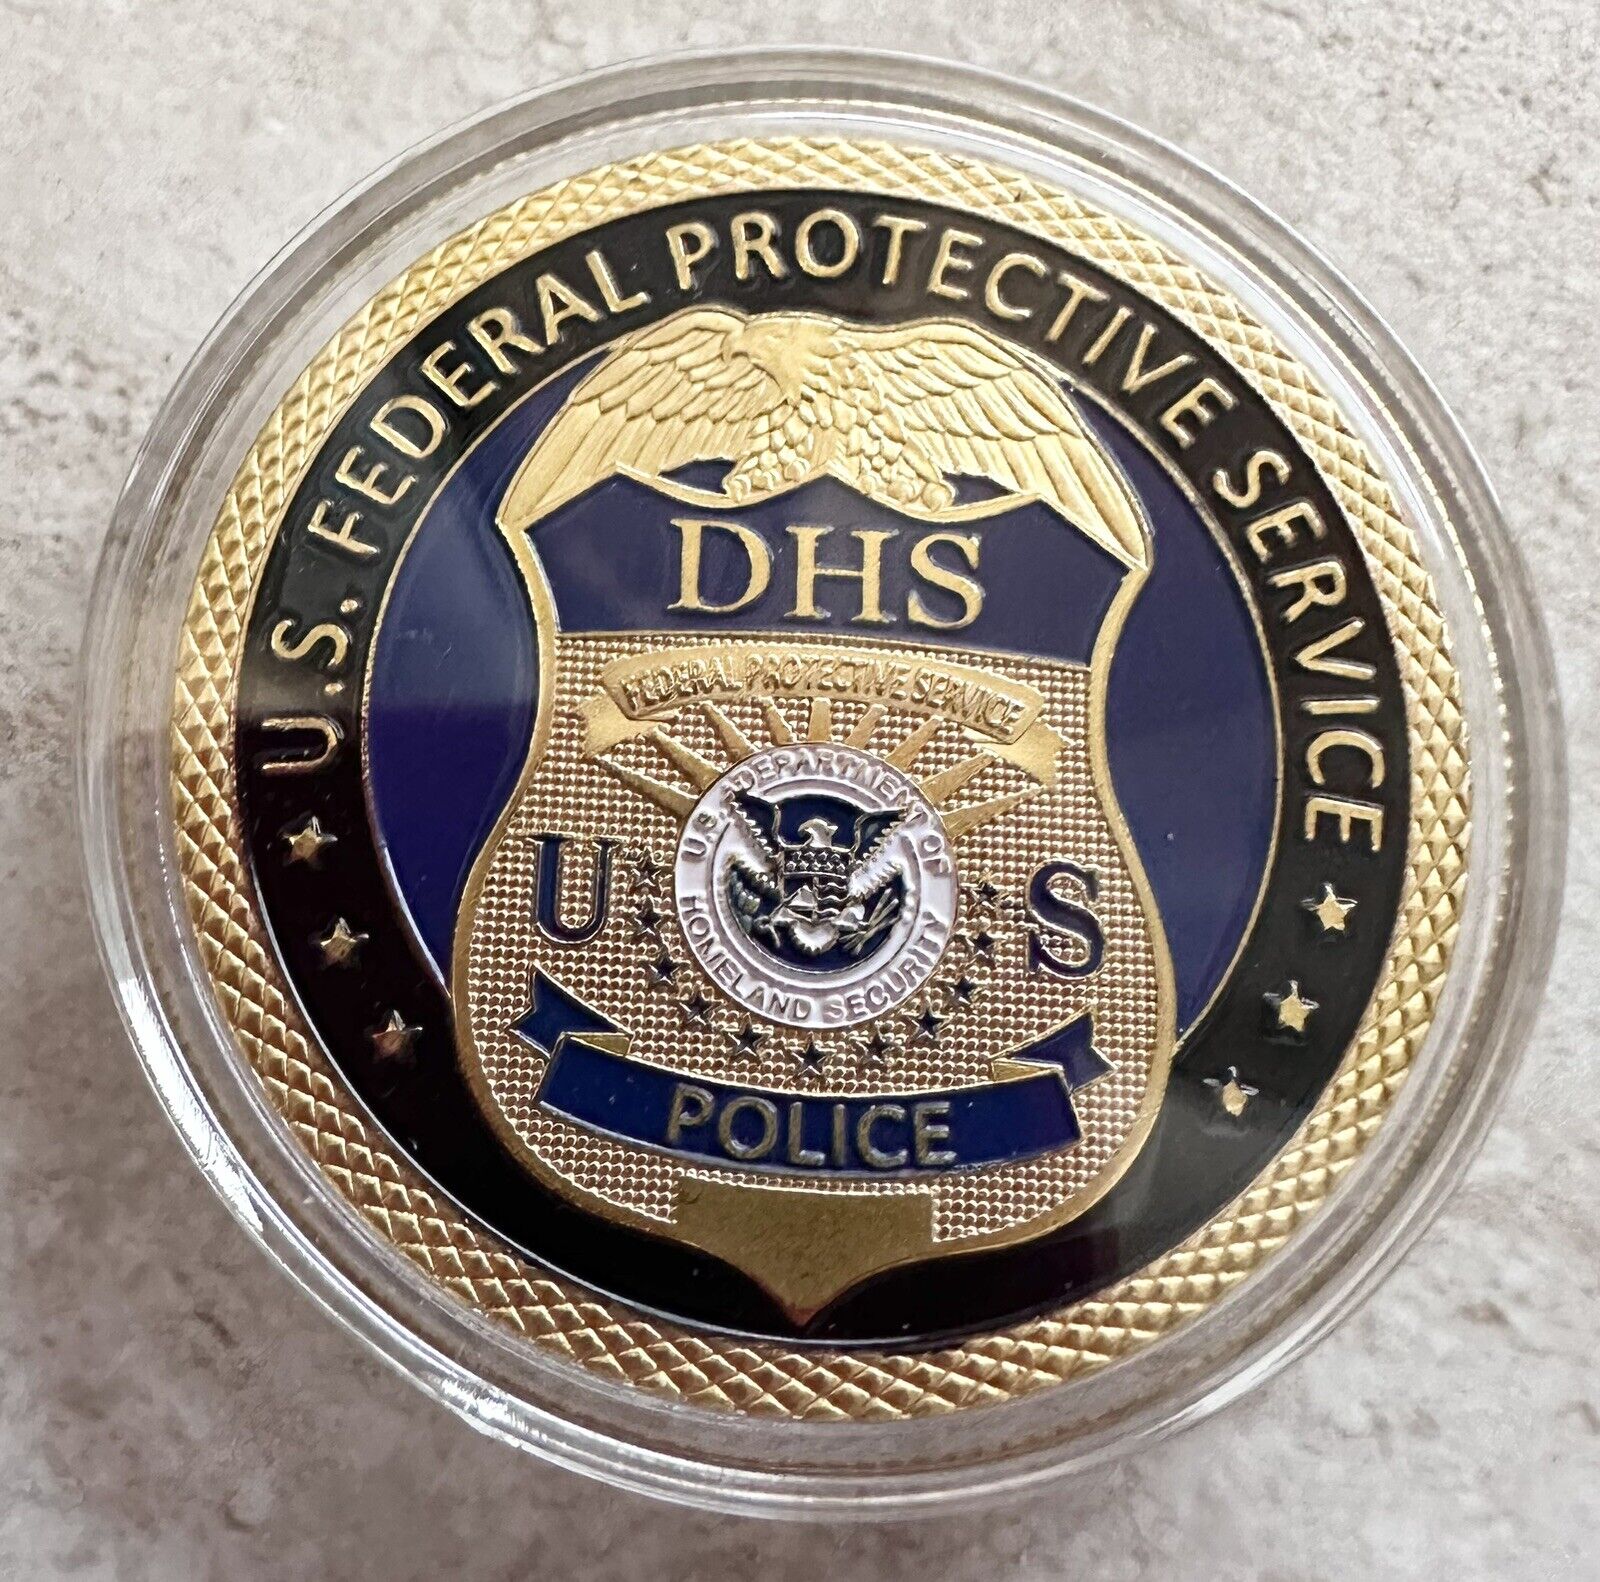 U S Federal Protective Service Police Dept of Home land Security Challenge Coin